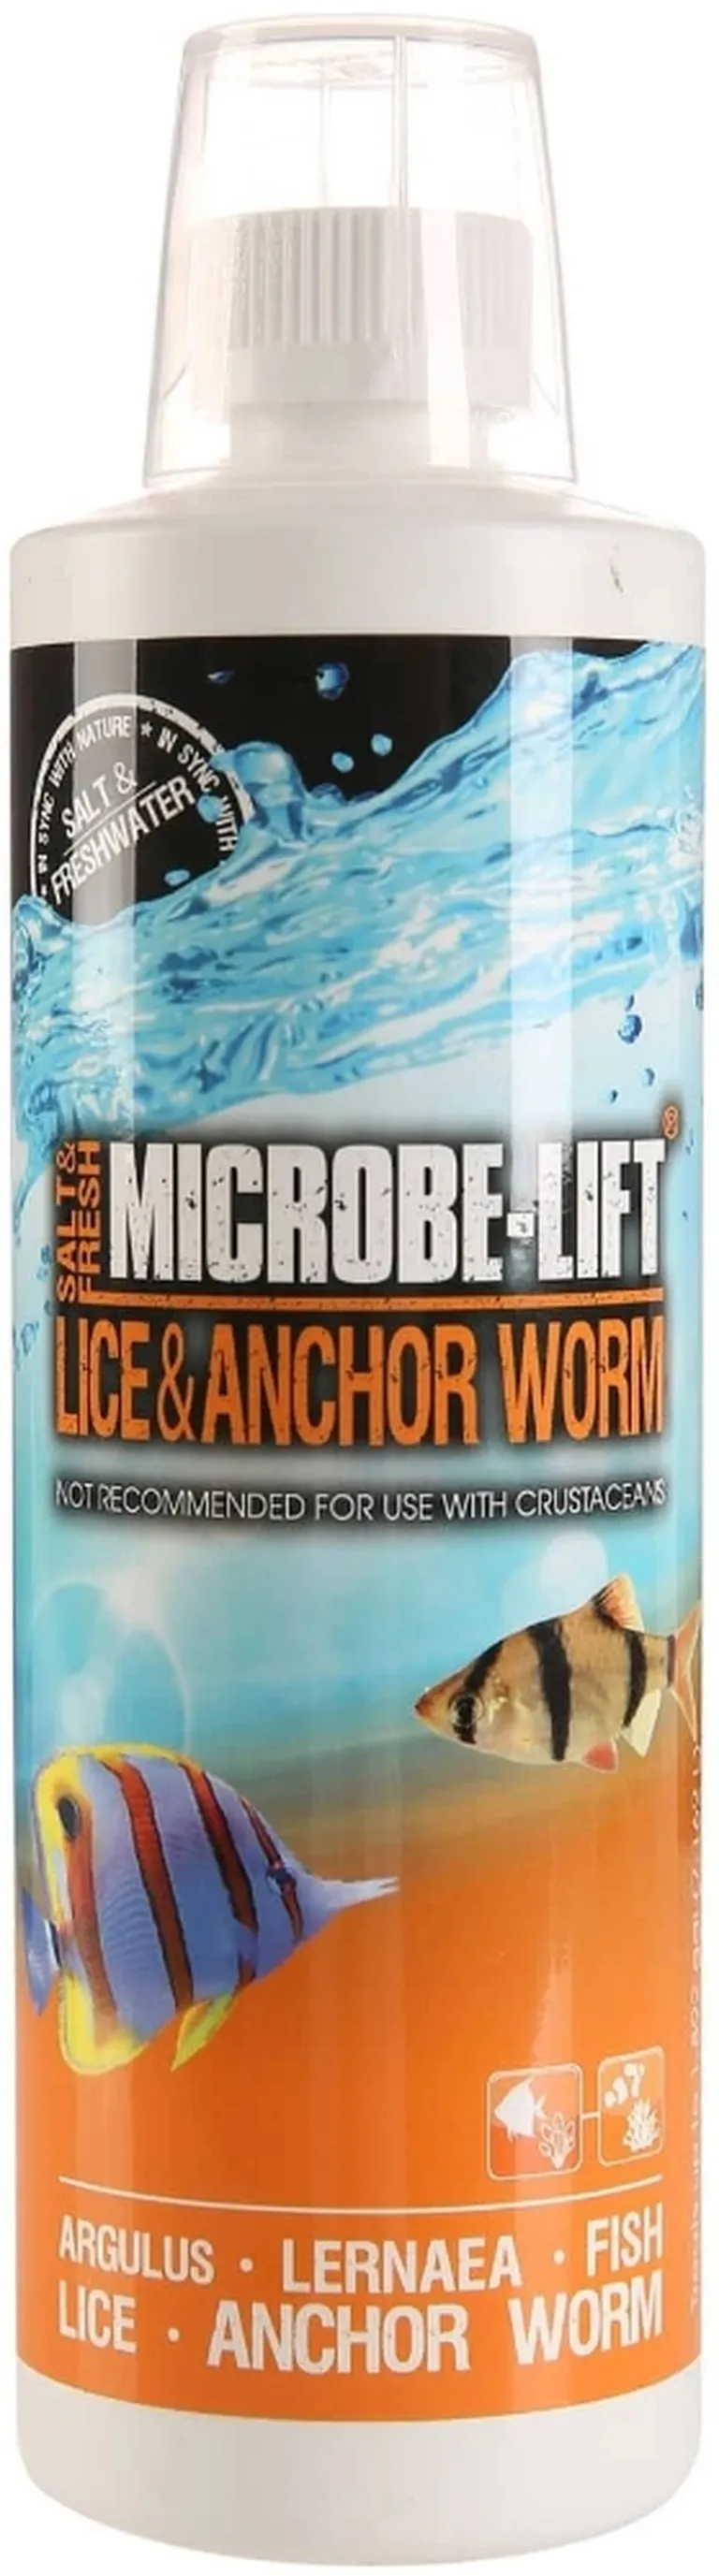 Microbe-Lift Lice and Anchor Worm Treatment Photo 1